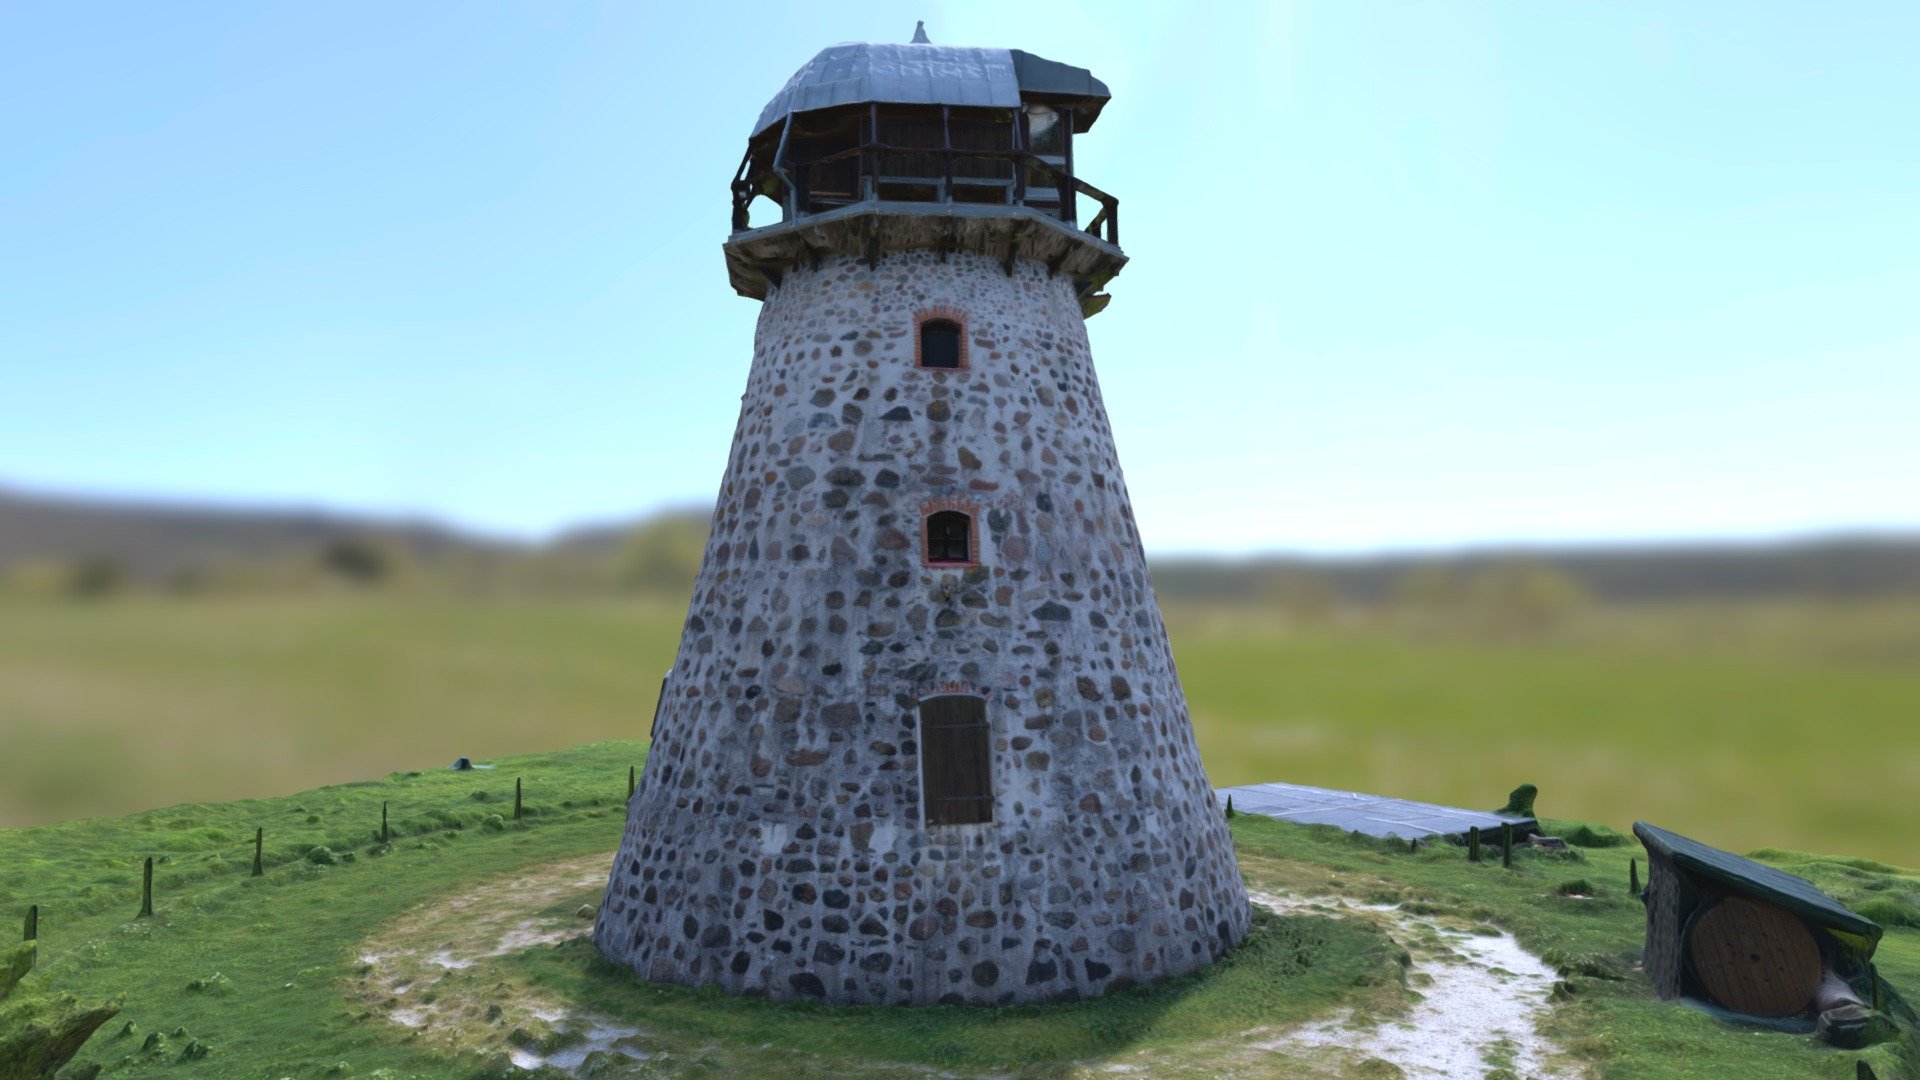 Old tower in Latvian countryside that has been turned into a museum.
Stone walls, small windows, round metal roof 3d model